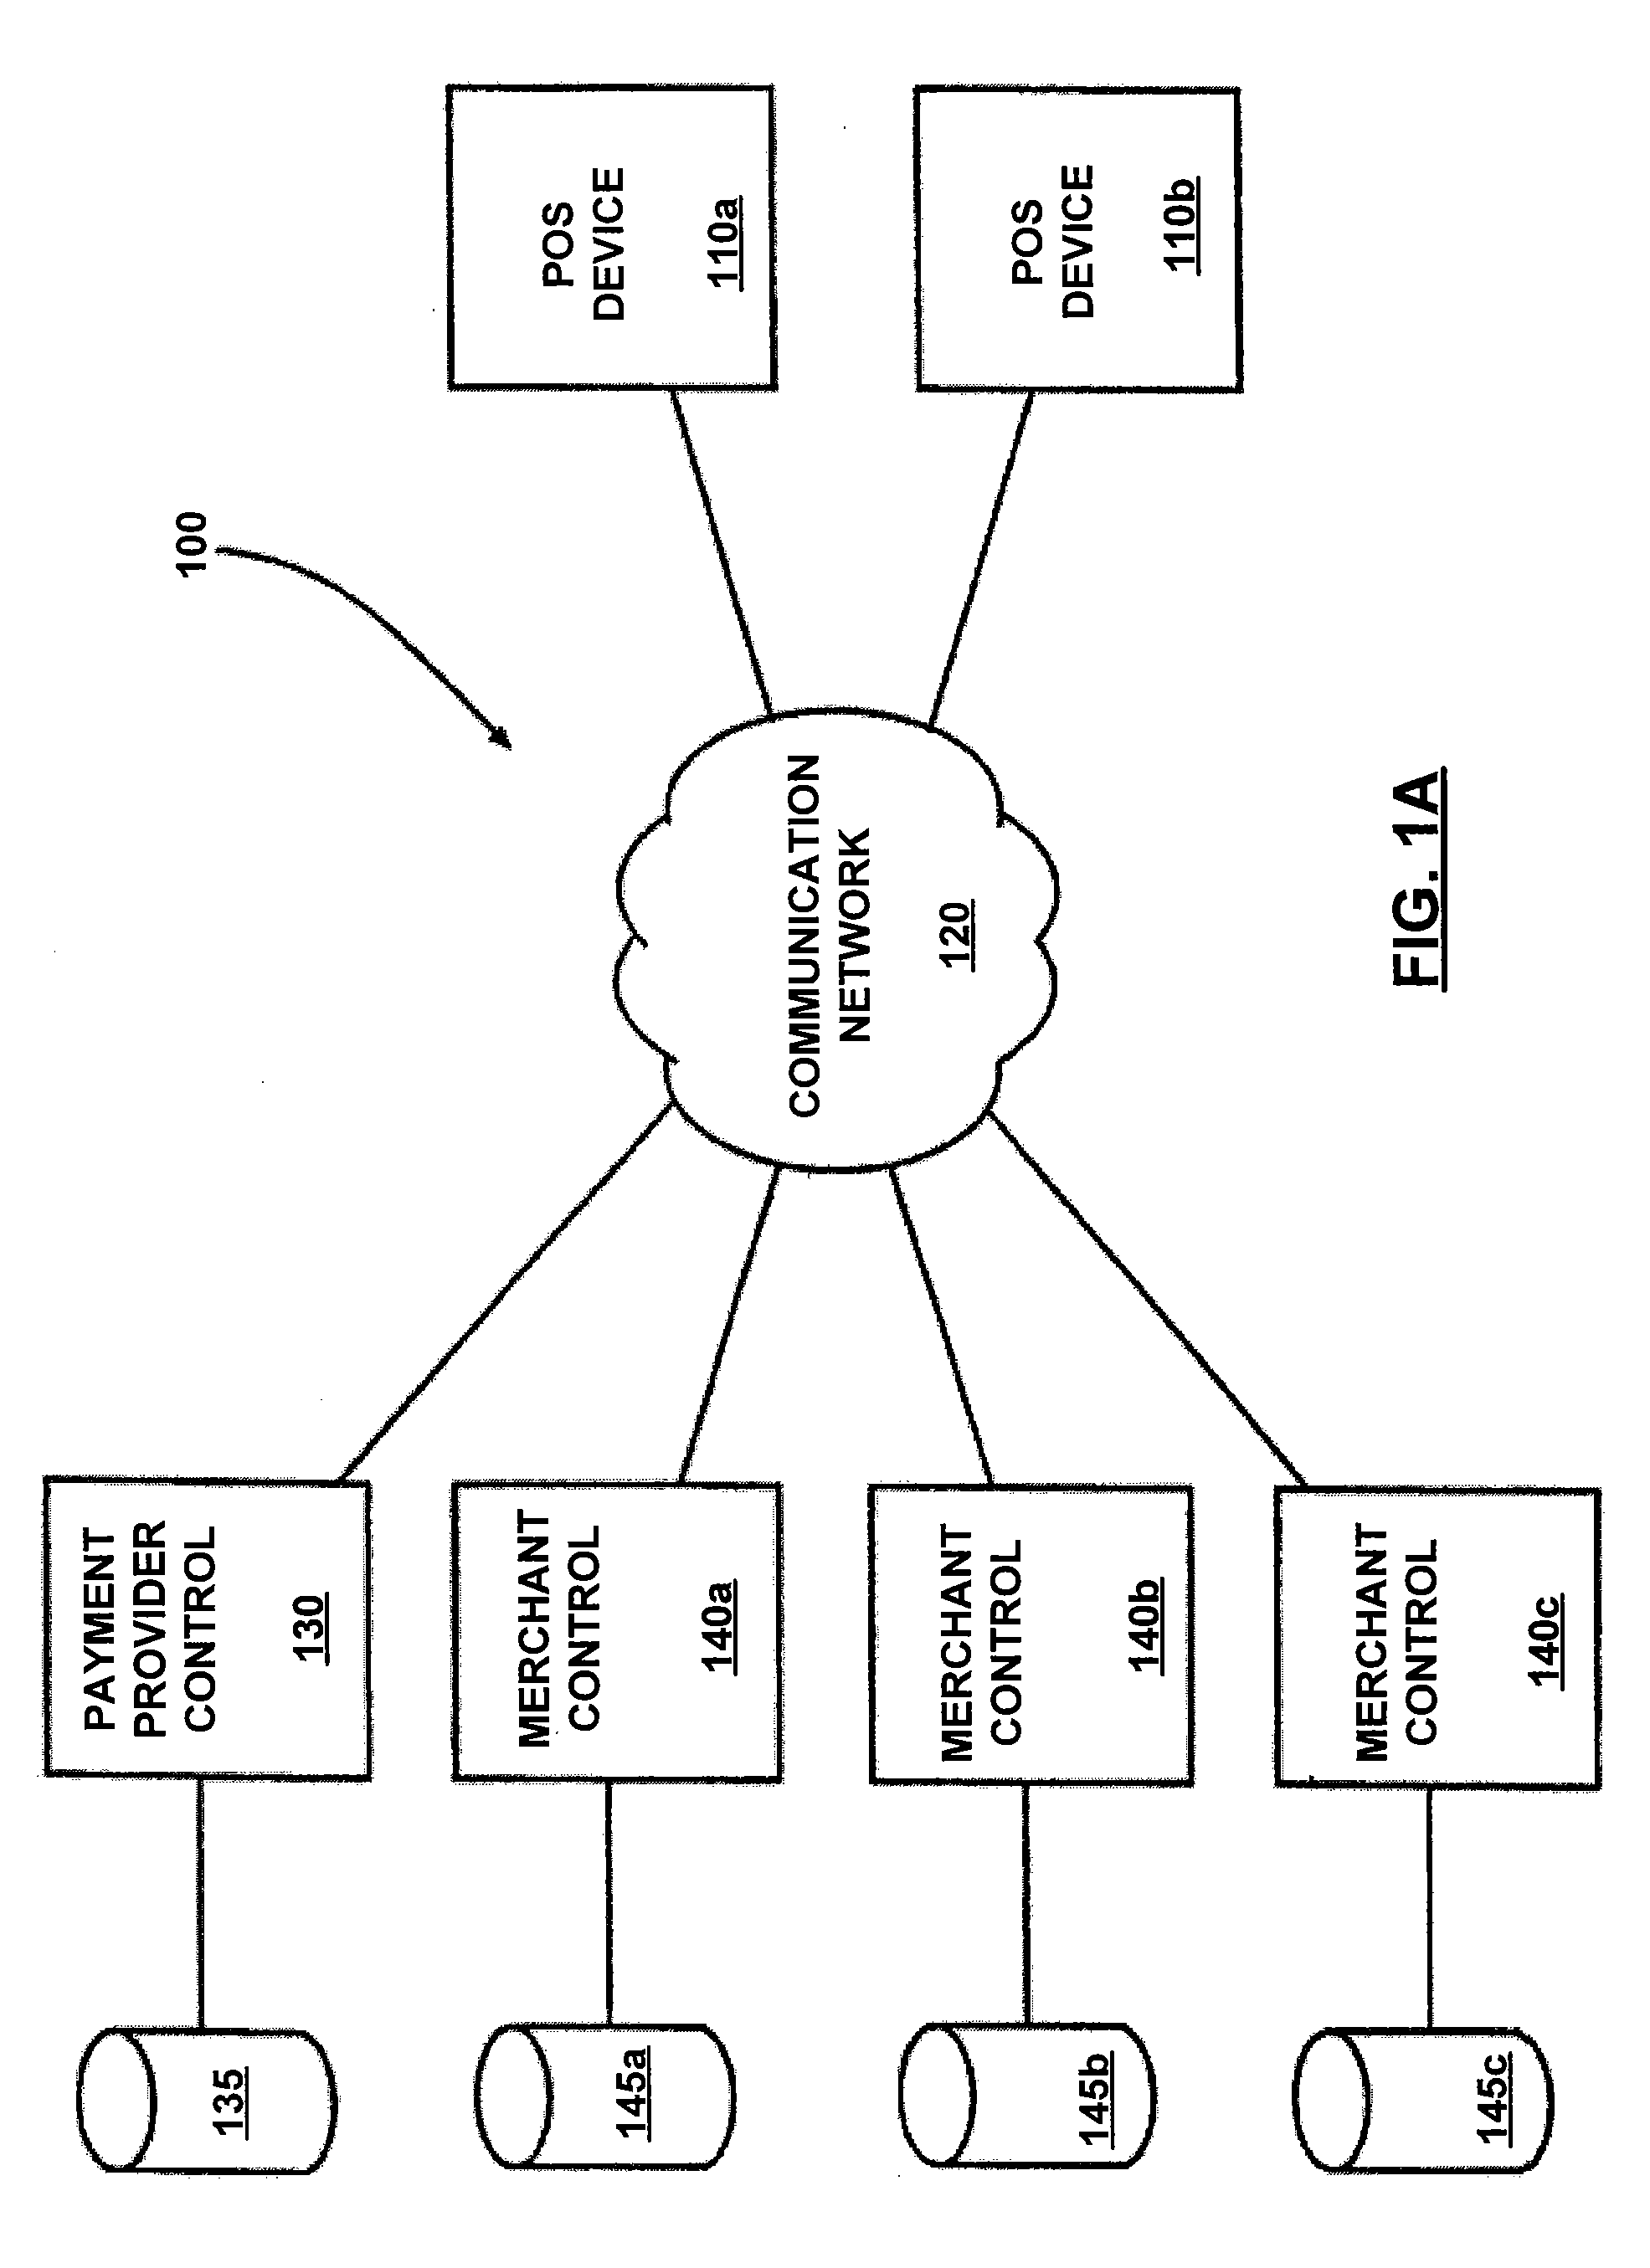 Airline ticket payment and reservation system and methods